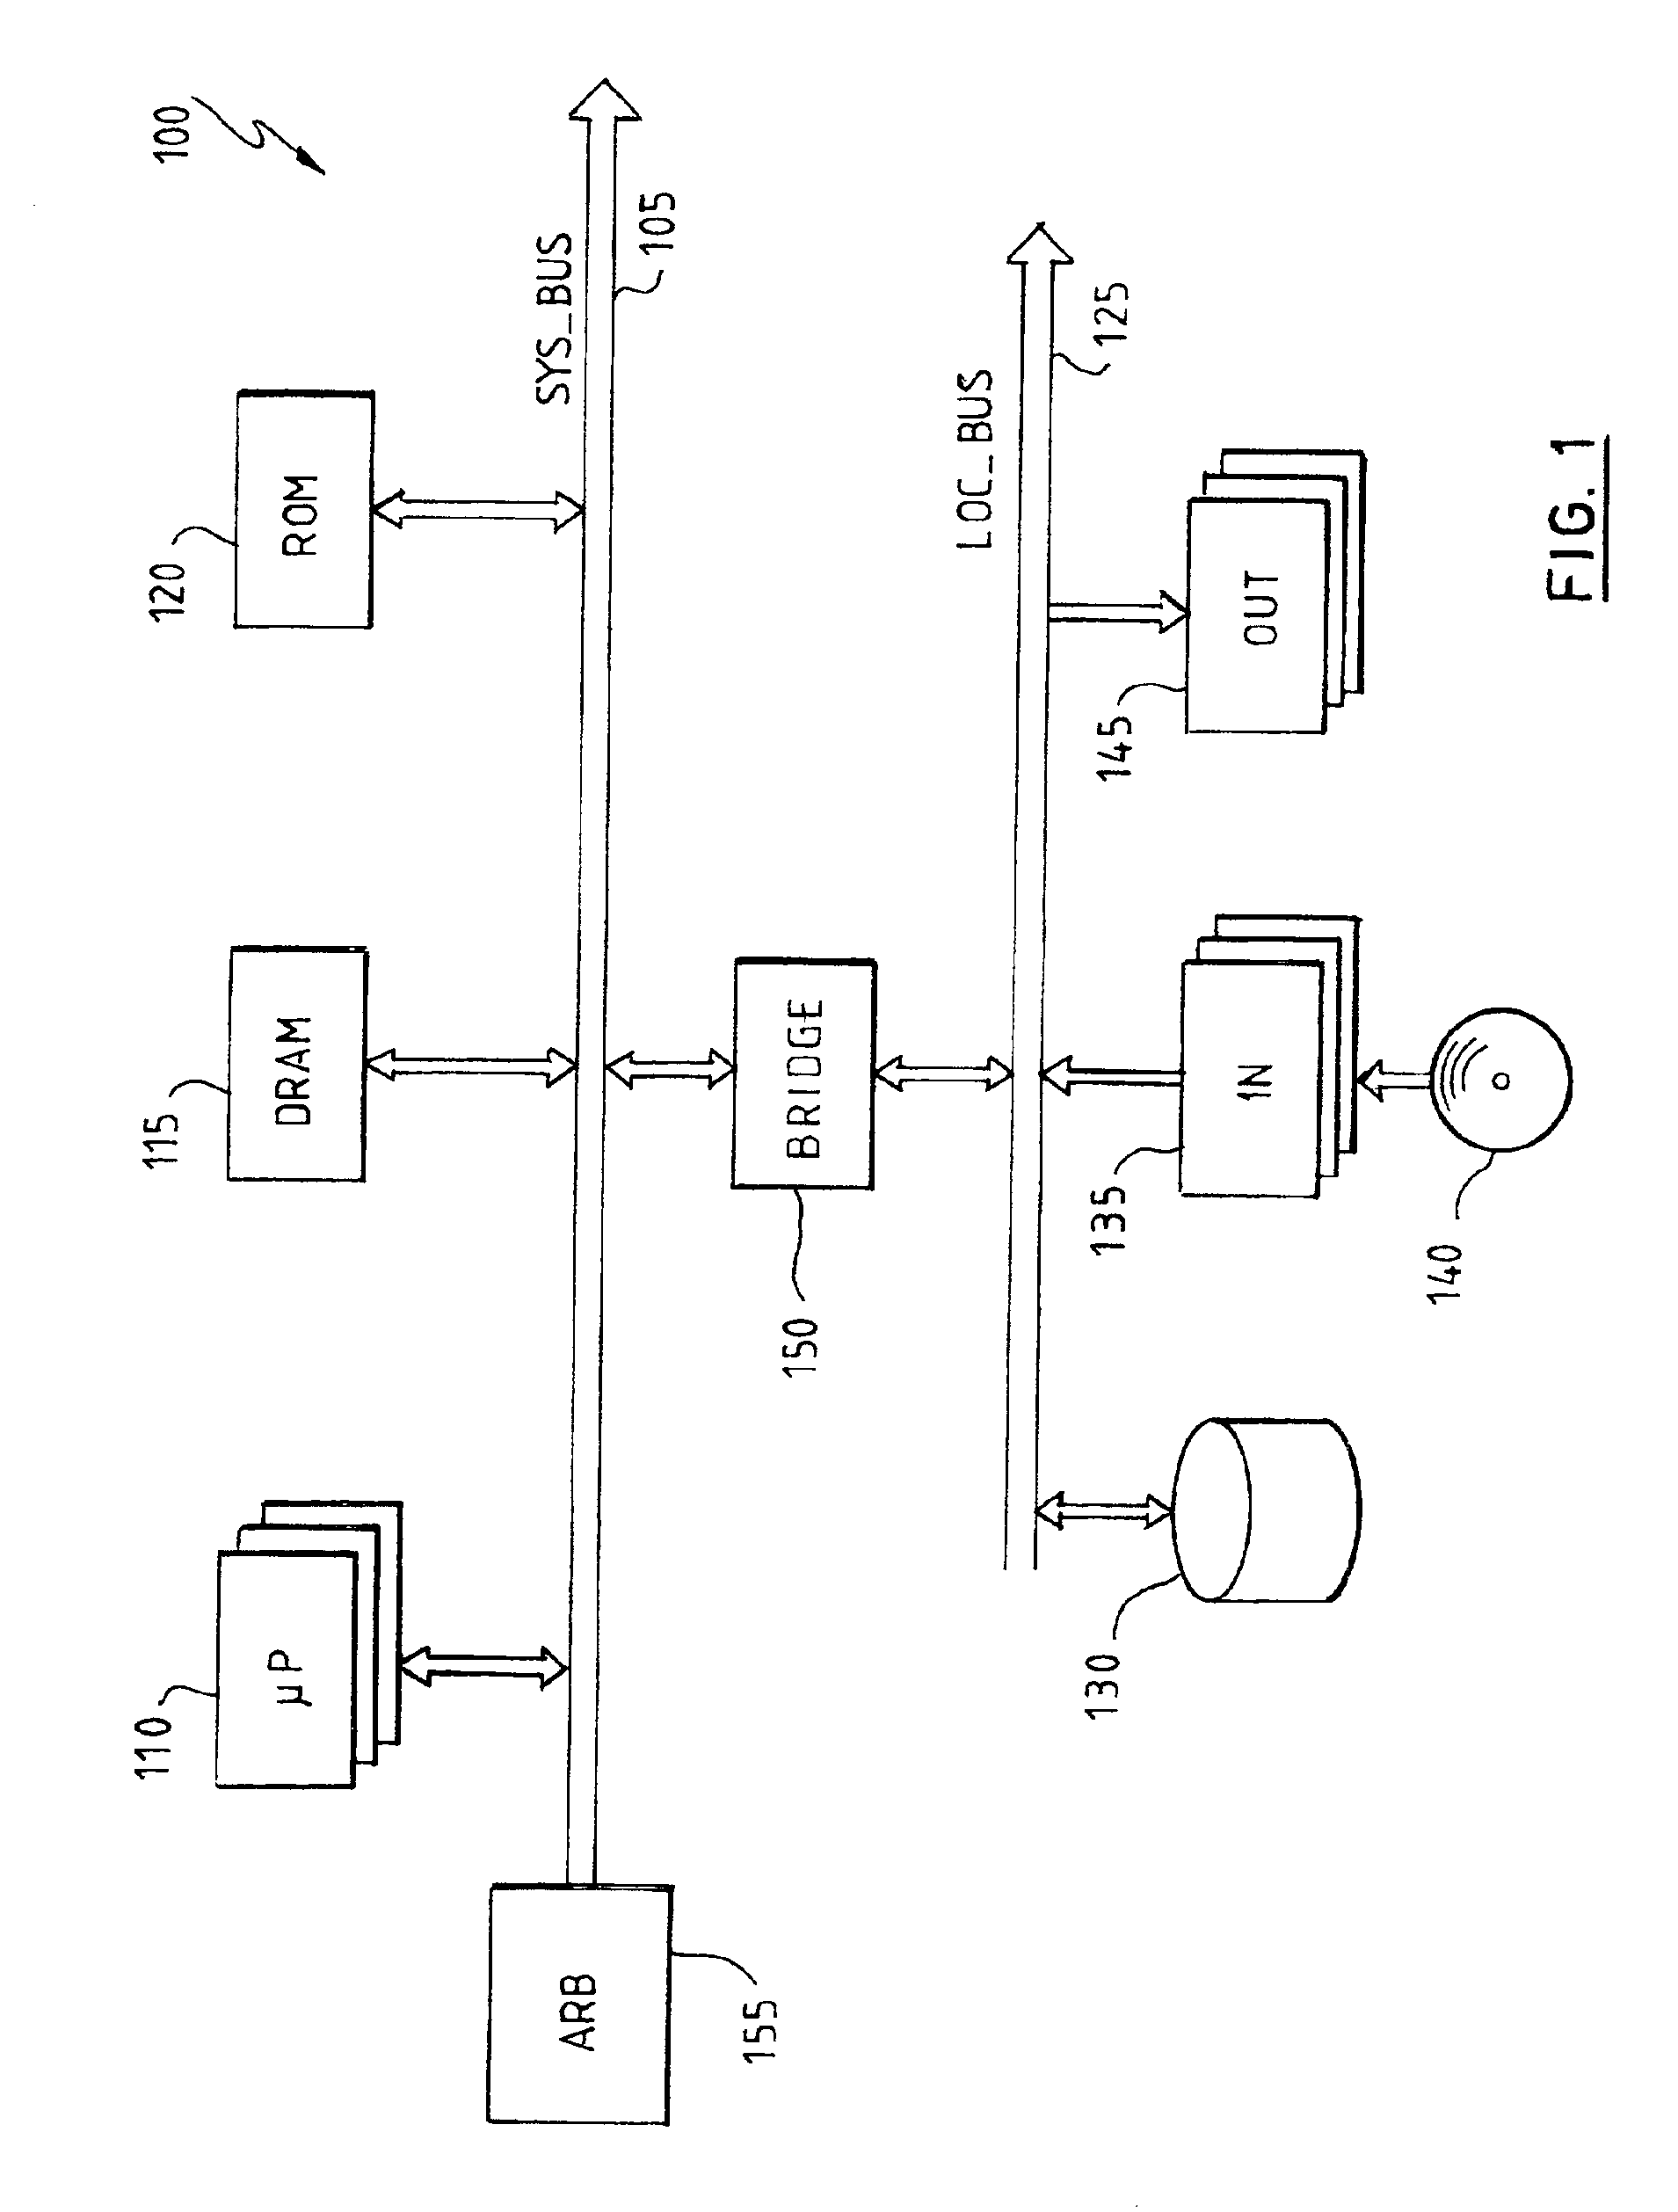 Method and system for scheduling execution of activities